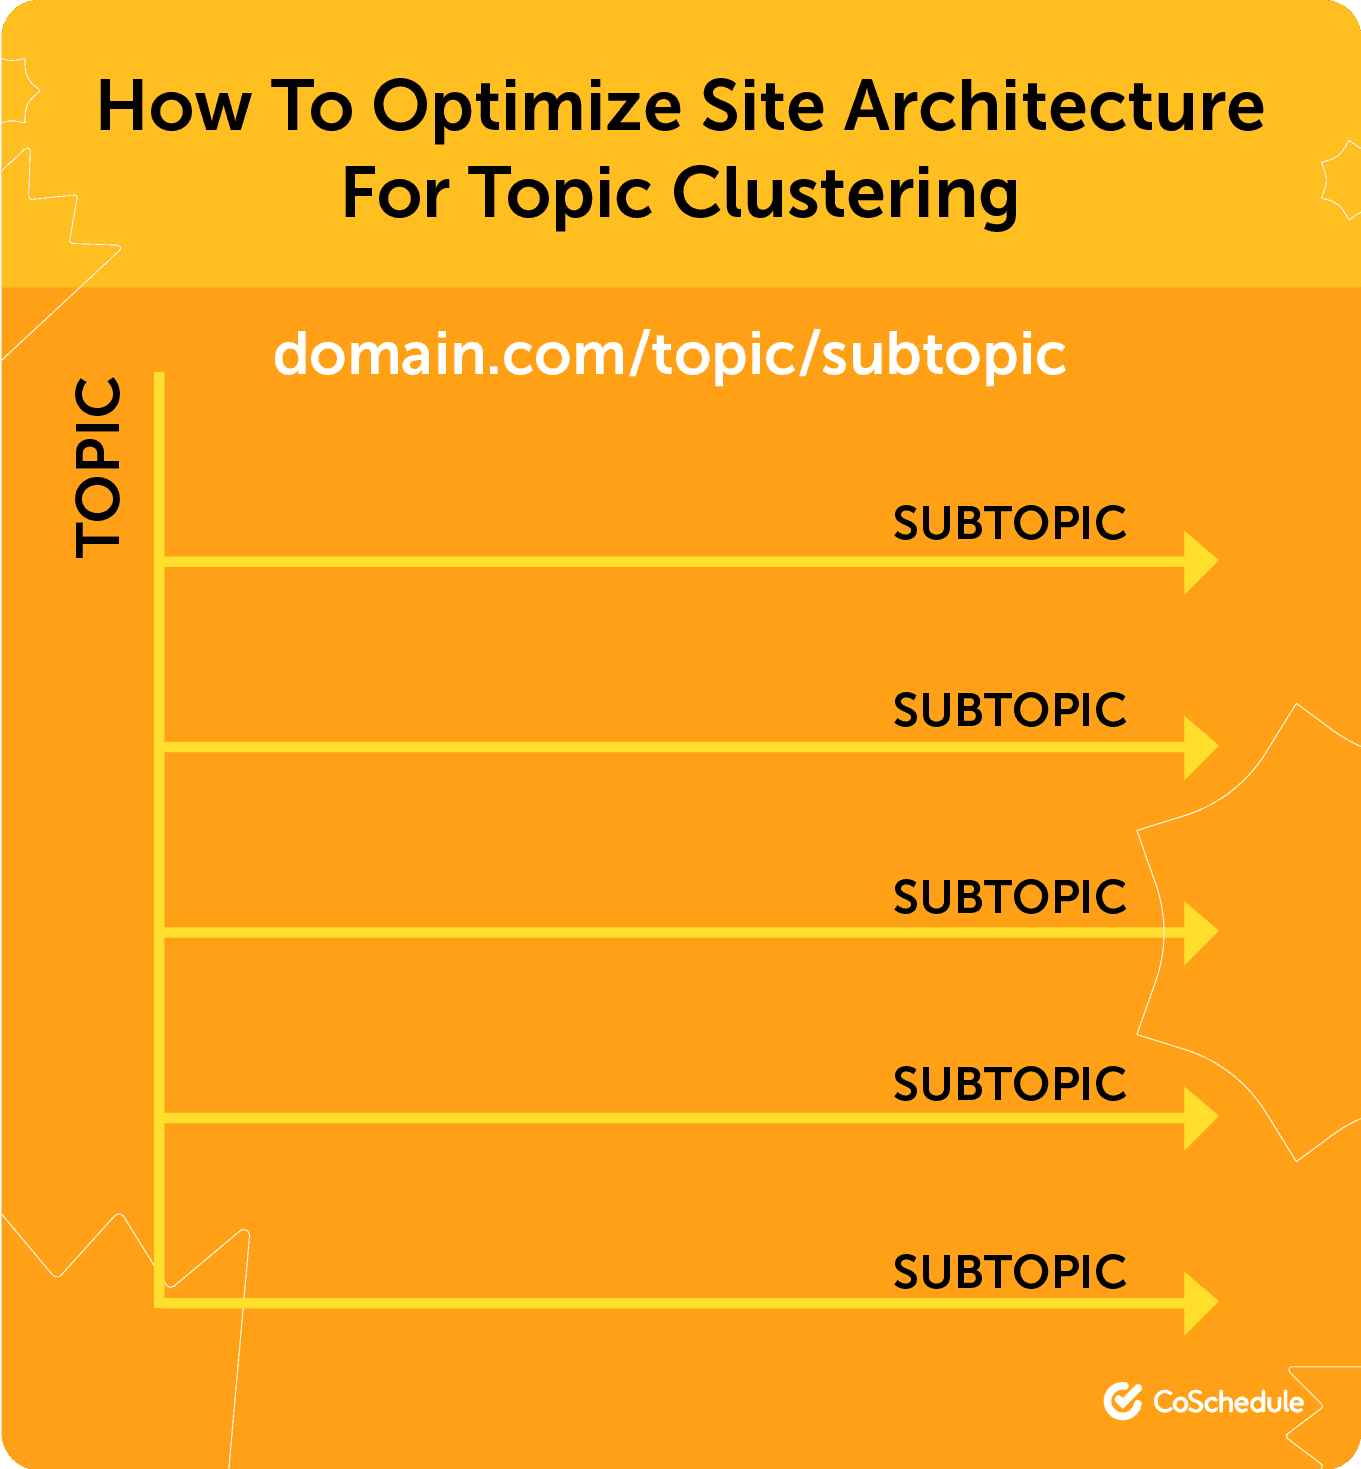 CoSchedule presents how to optimize sire architecture for topic clustering starting with the topic and leaning into the subtopic.